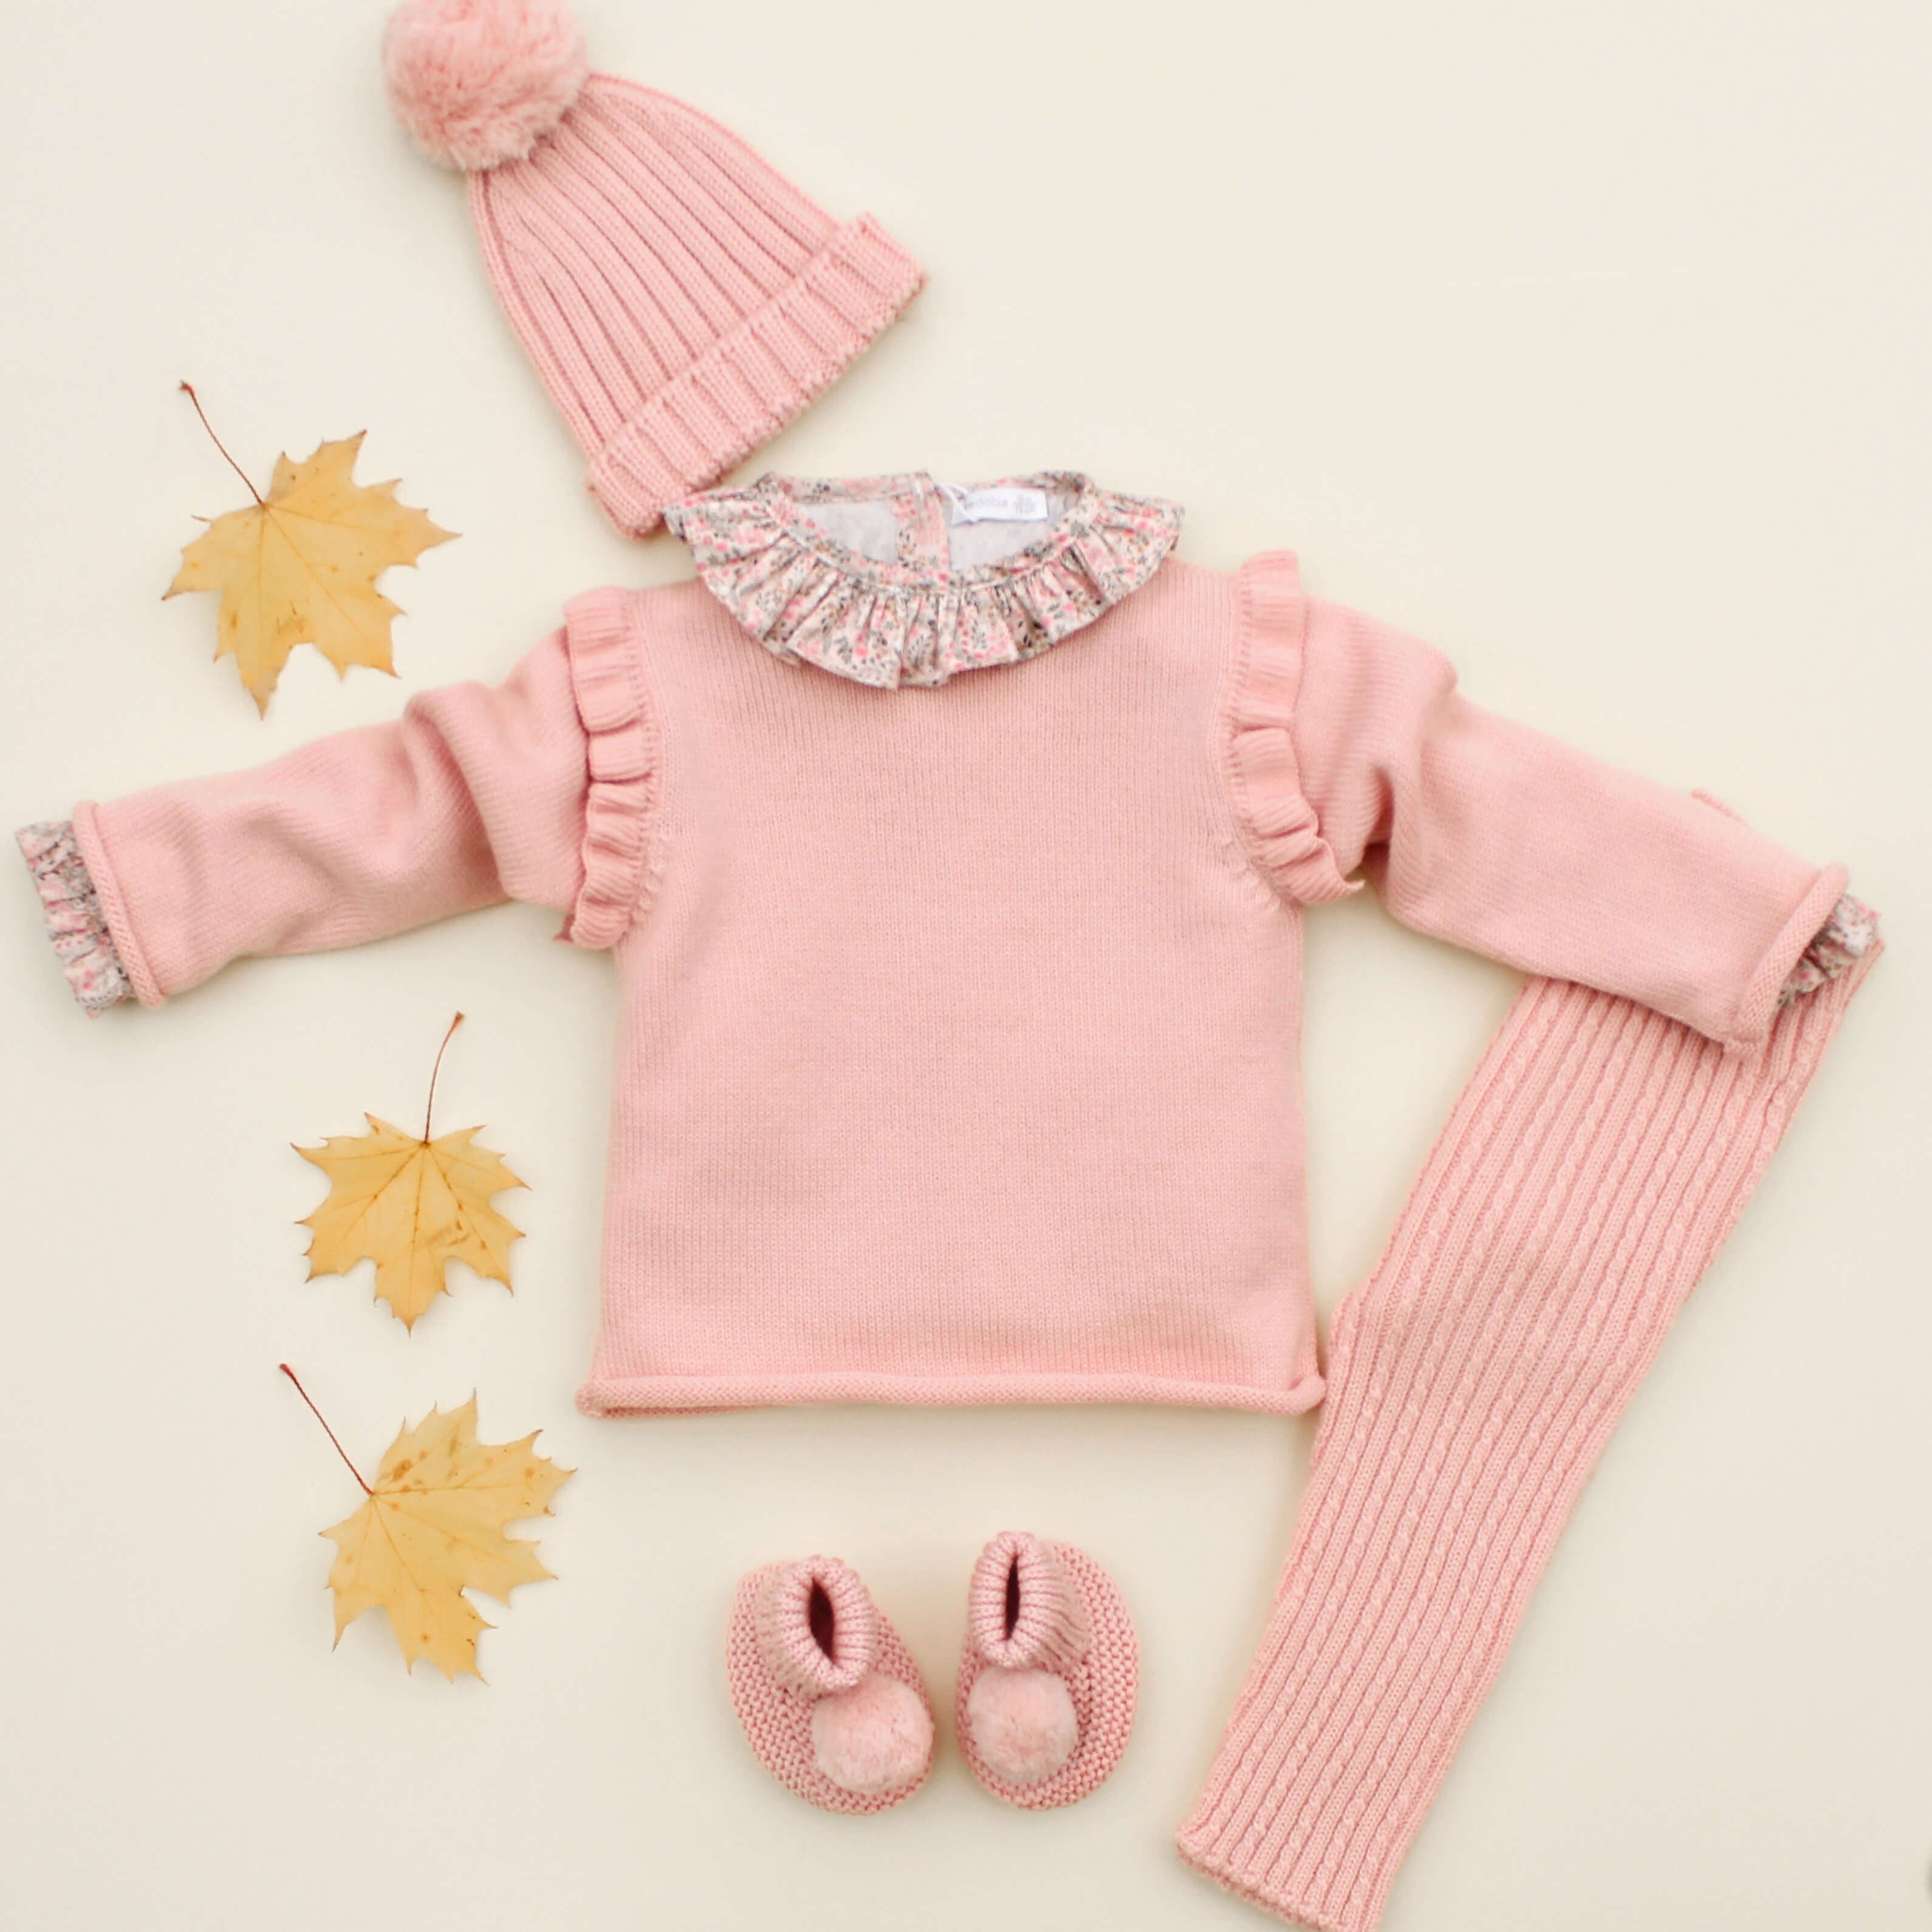 wedoble baby outfit with pink wool baby leggings and swewter